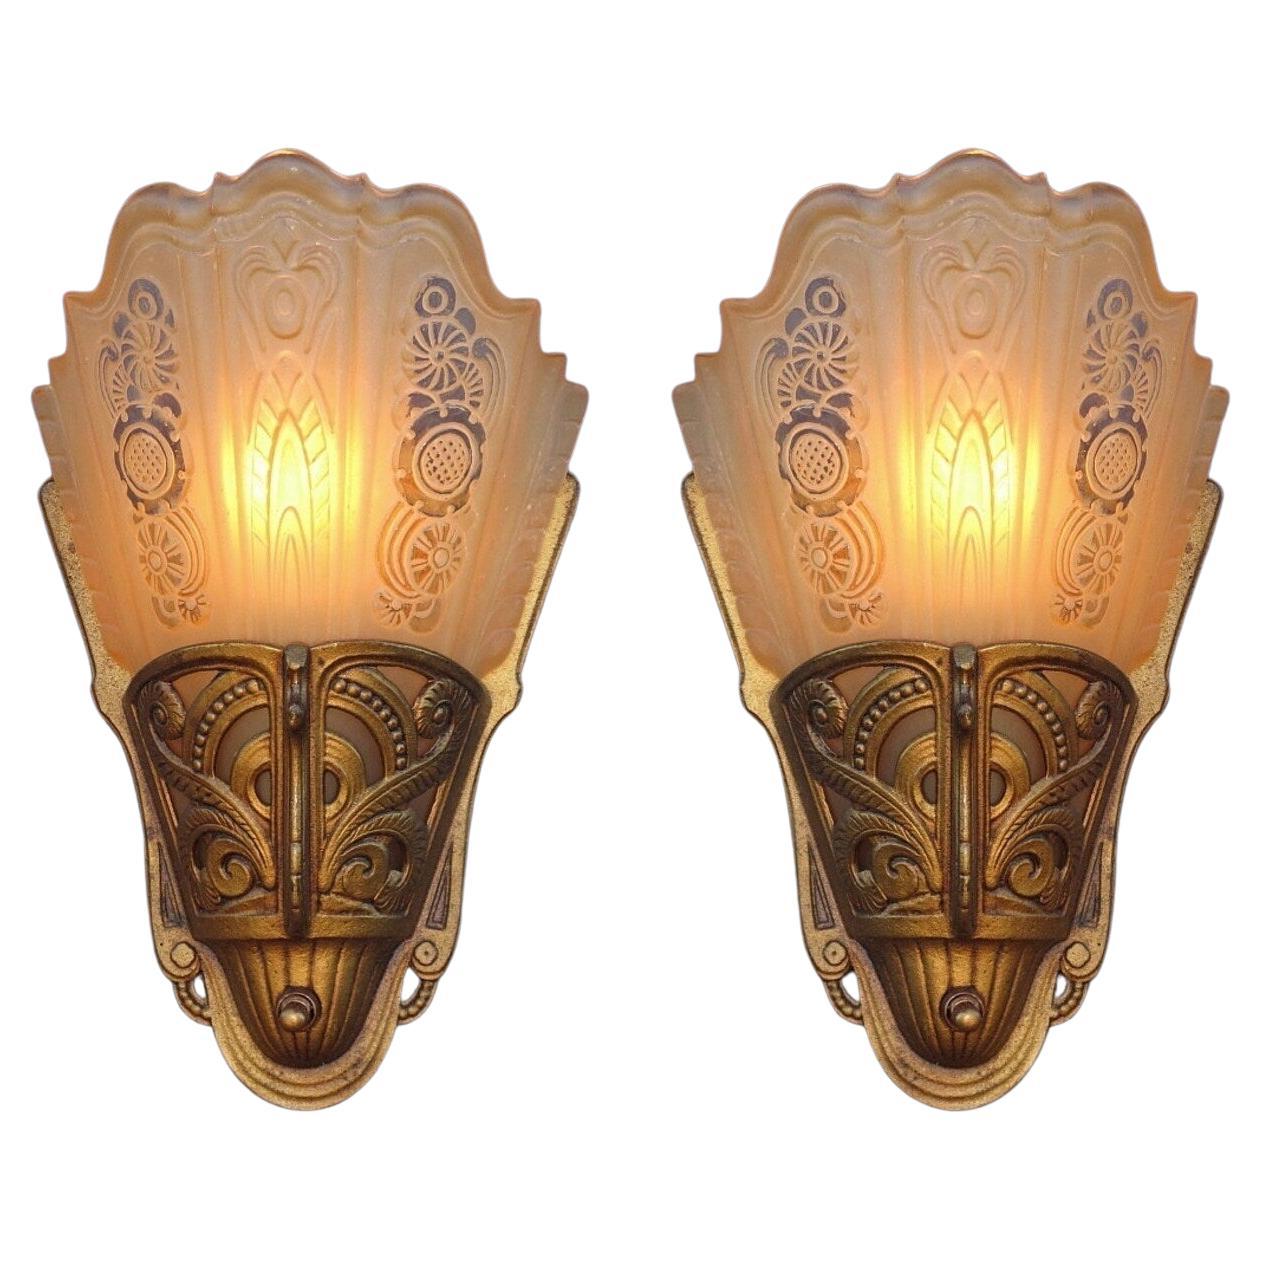 3 Pair Vintage Restored Regal Sconces with Consolidated Shades priced per pair For Sale